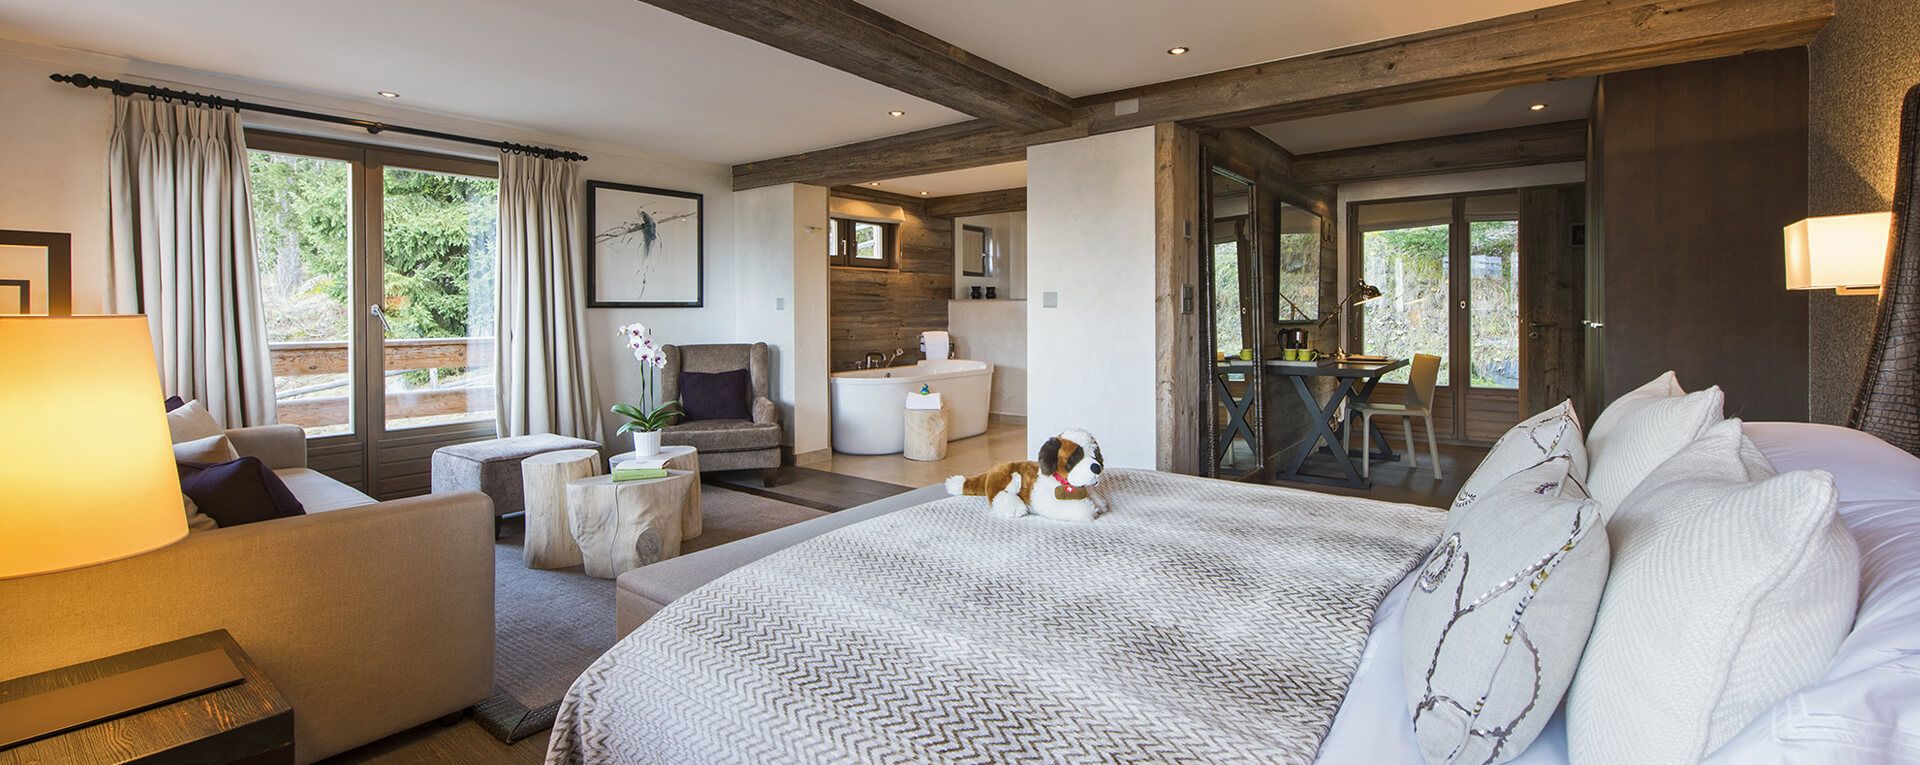 The Lodge at Verbier